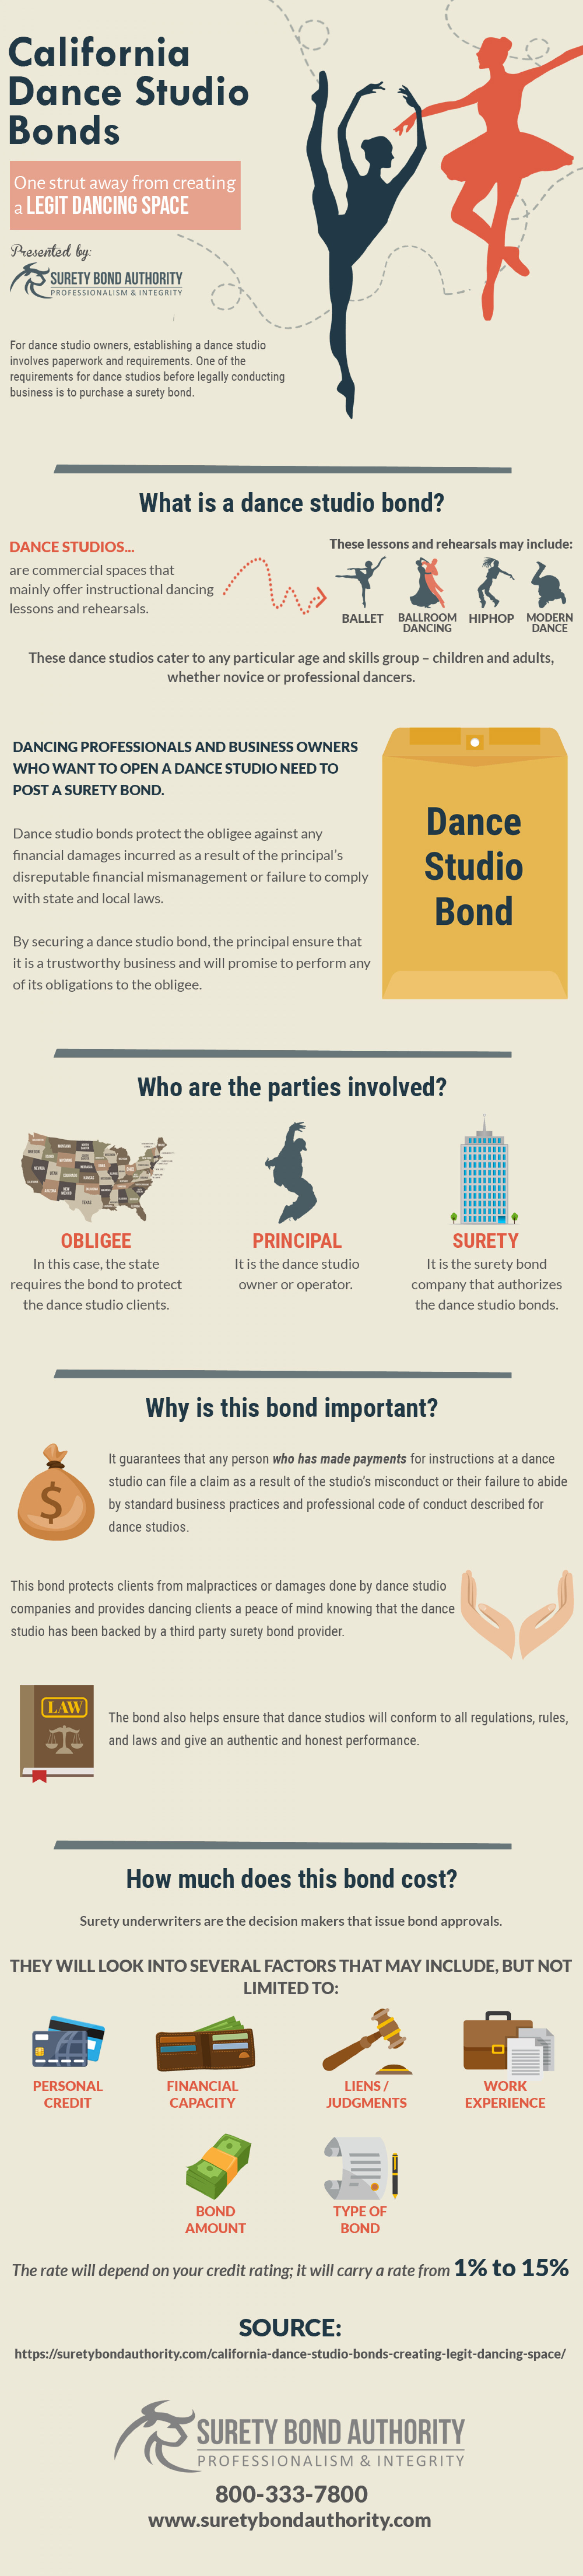 Why do you need a Dance Studio Bond in California? Infographic